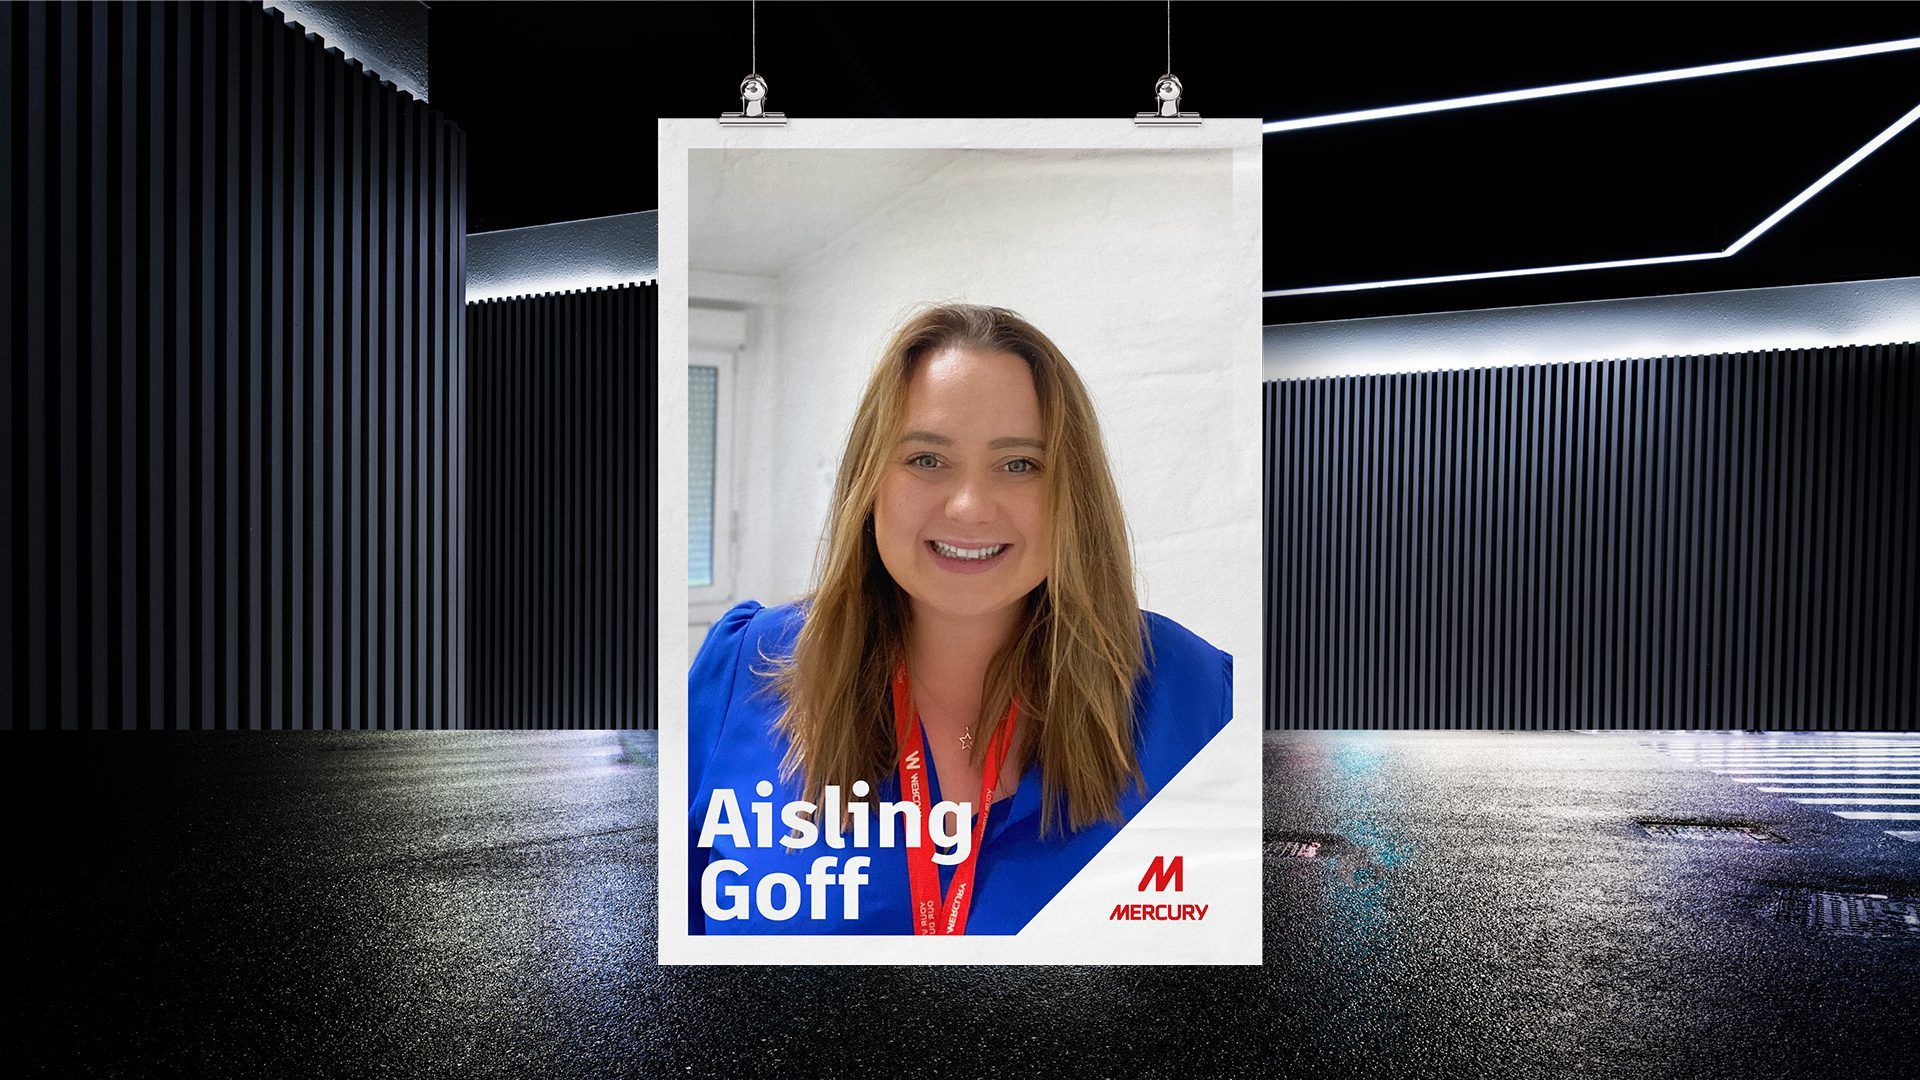 Behind the Build: Interview with Aisling Goff, Business Unit Quality Manager for Mercury Engineering